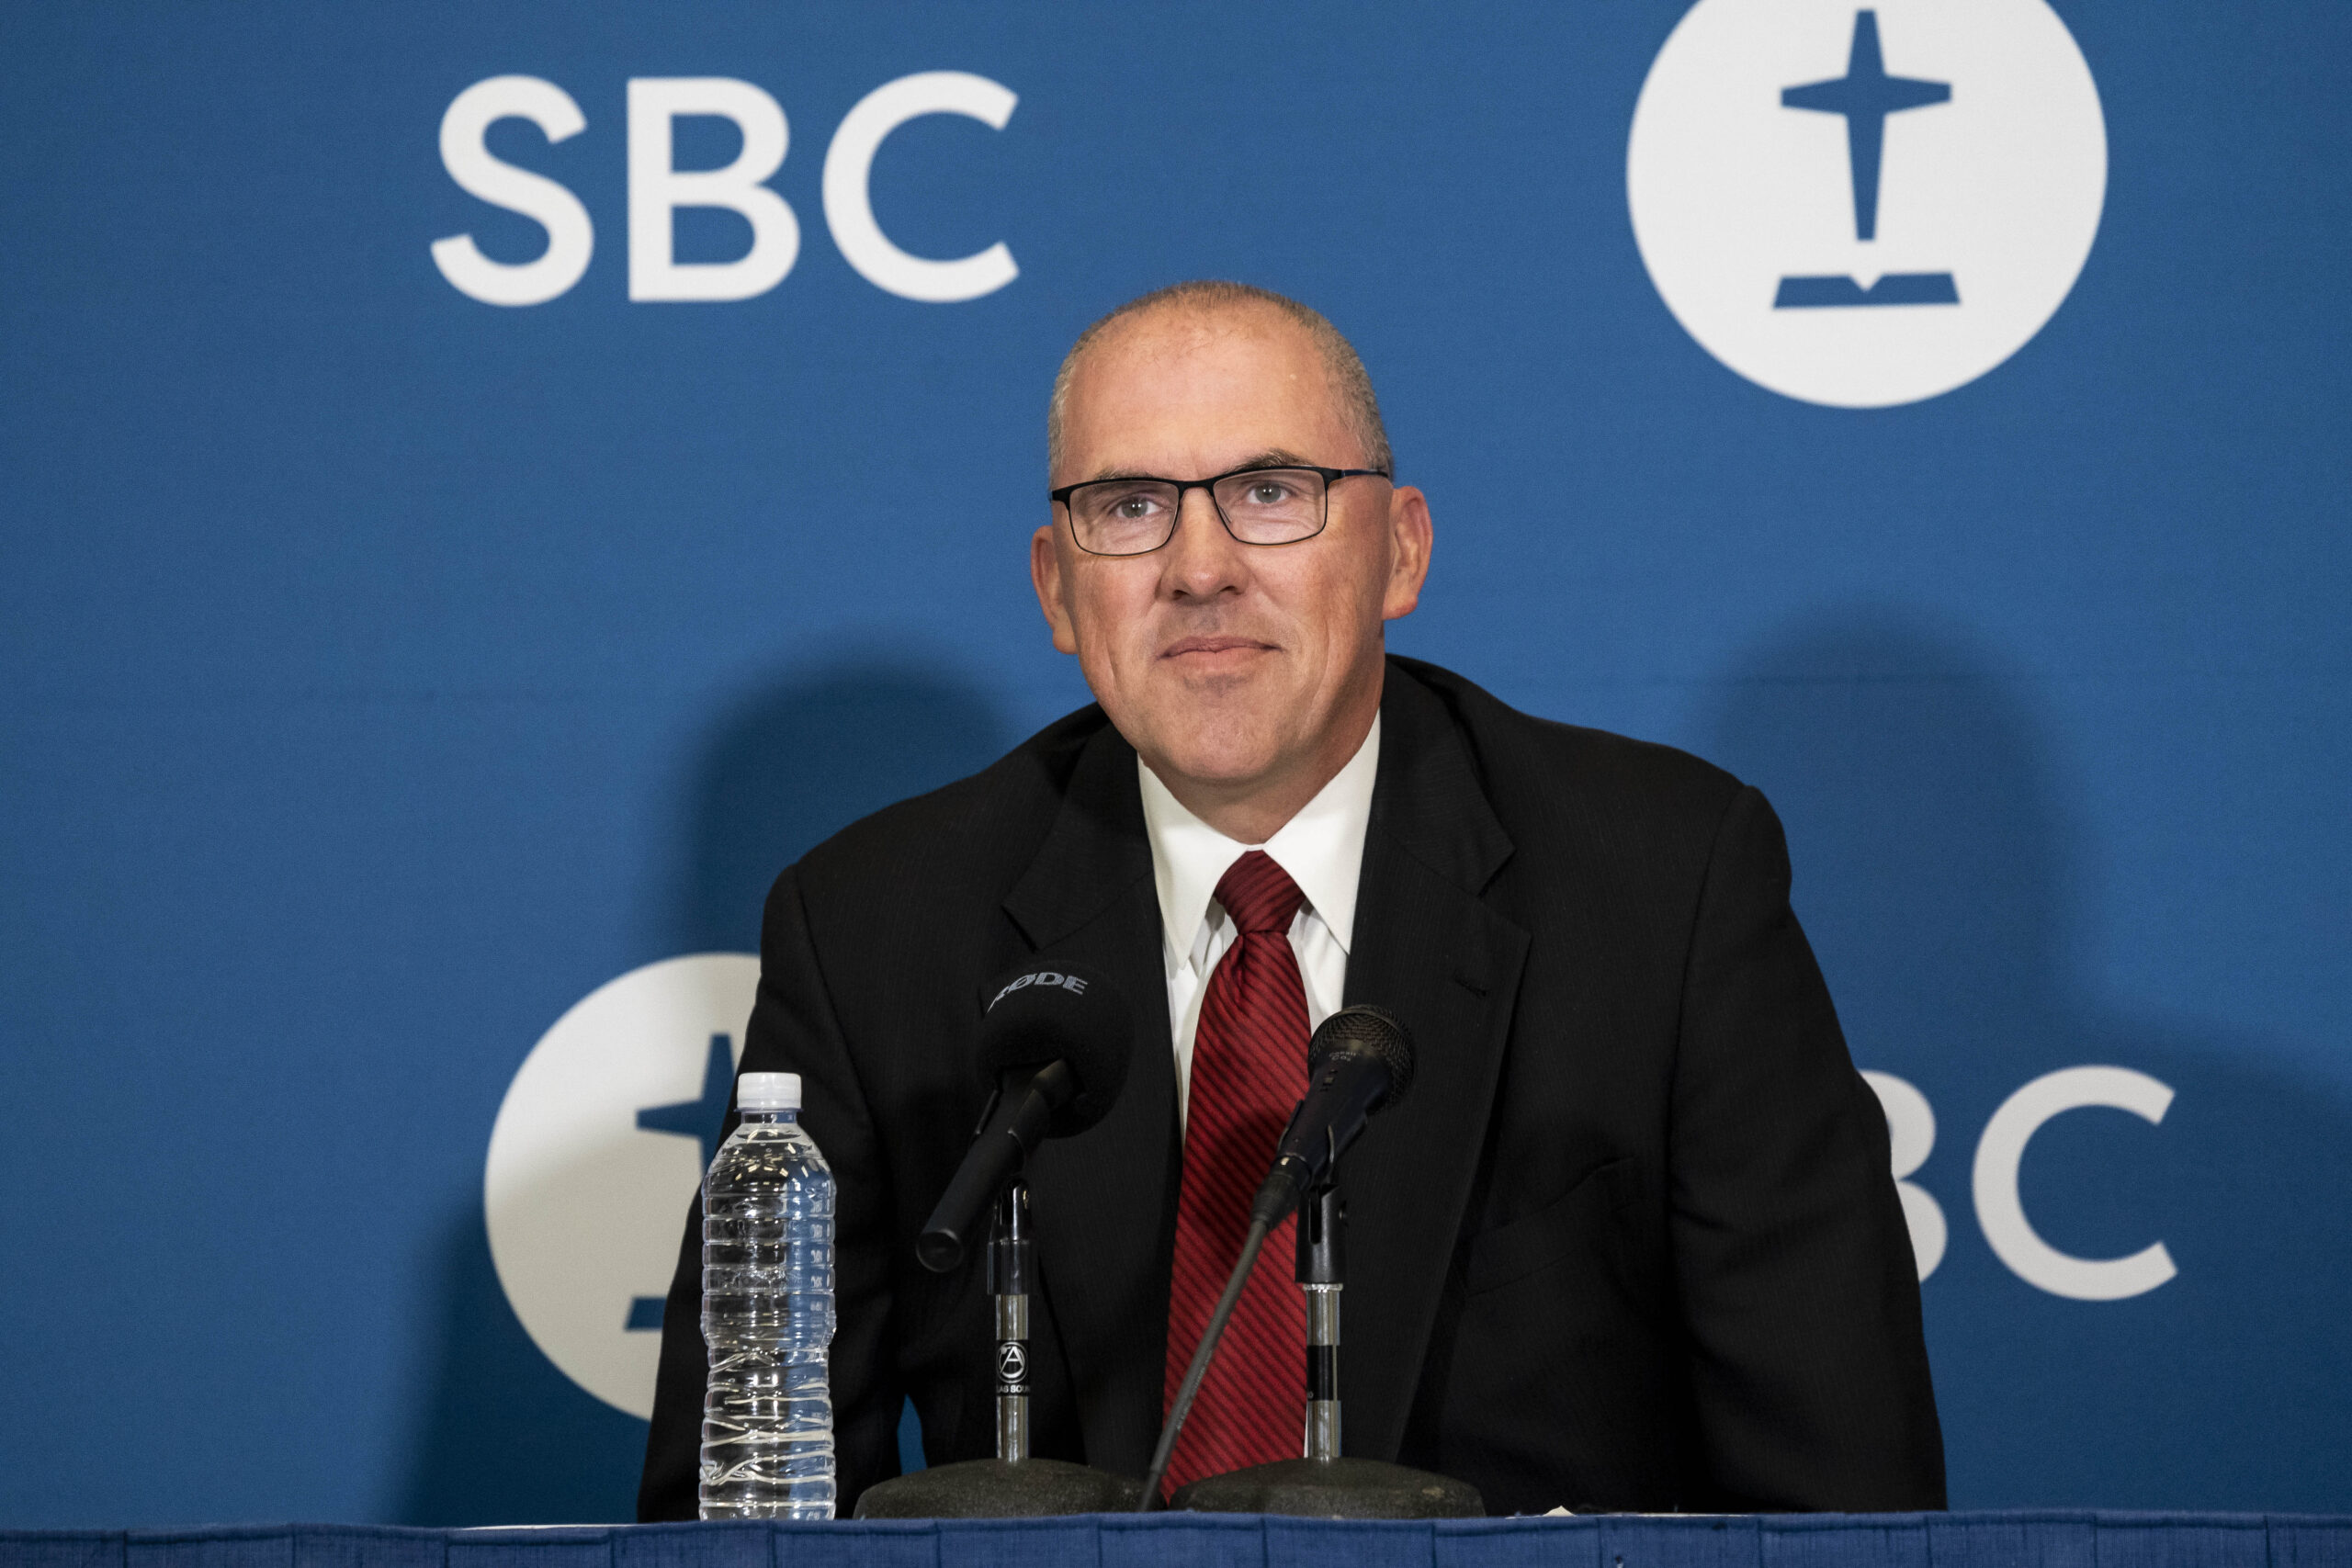 Online News Newly elected SBC president Bart Barber speaks during a press conference at the Southern Baptist Convention annual meeting, held at the Anaheim Convention Center in Anaheim, California, on Wednesday, June 15, 2022. Photo by Justin L. Stewart/Religion News Service